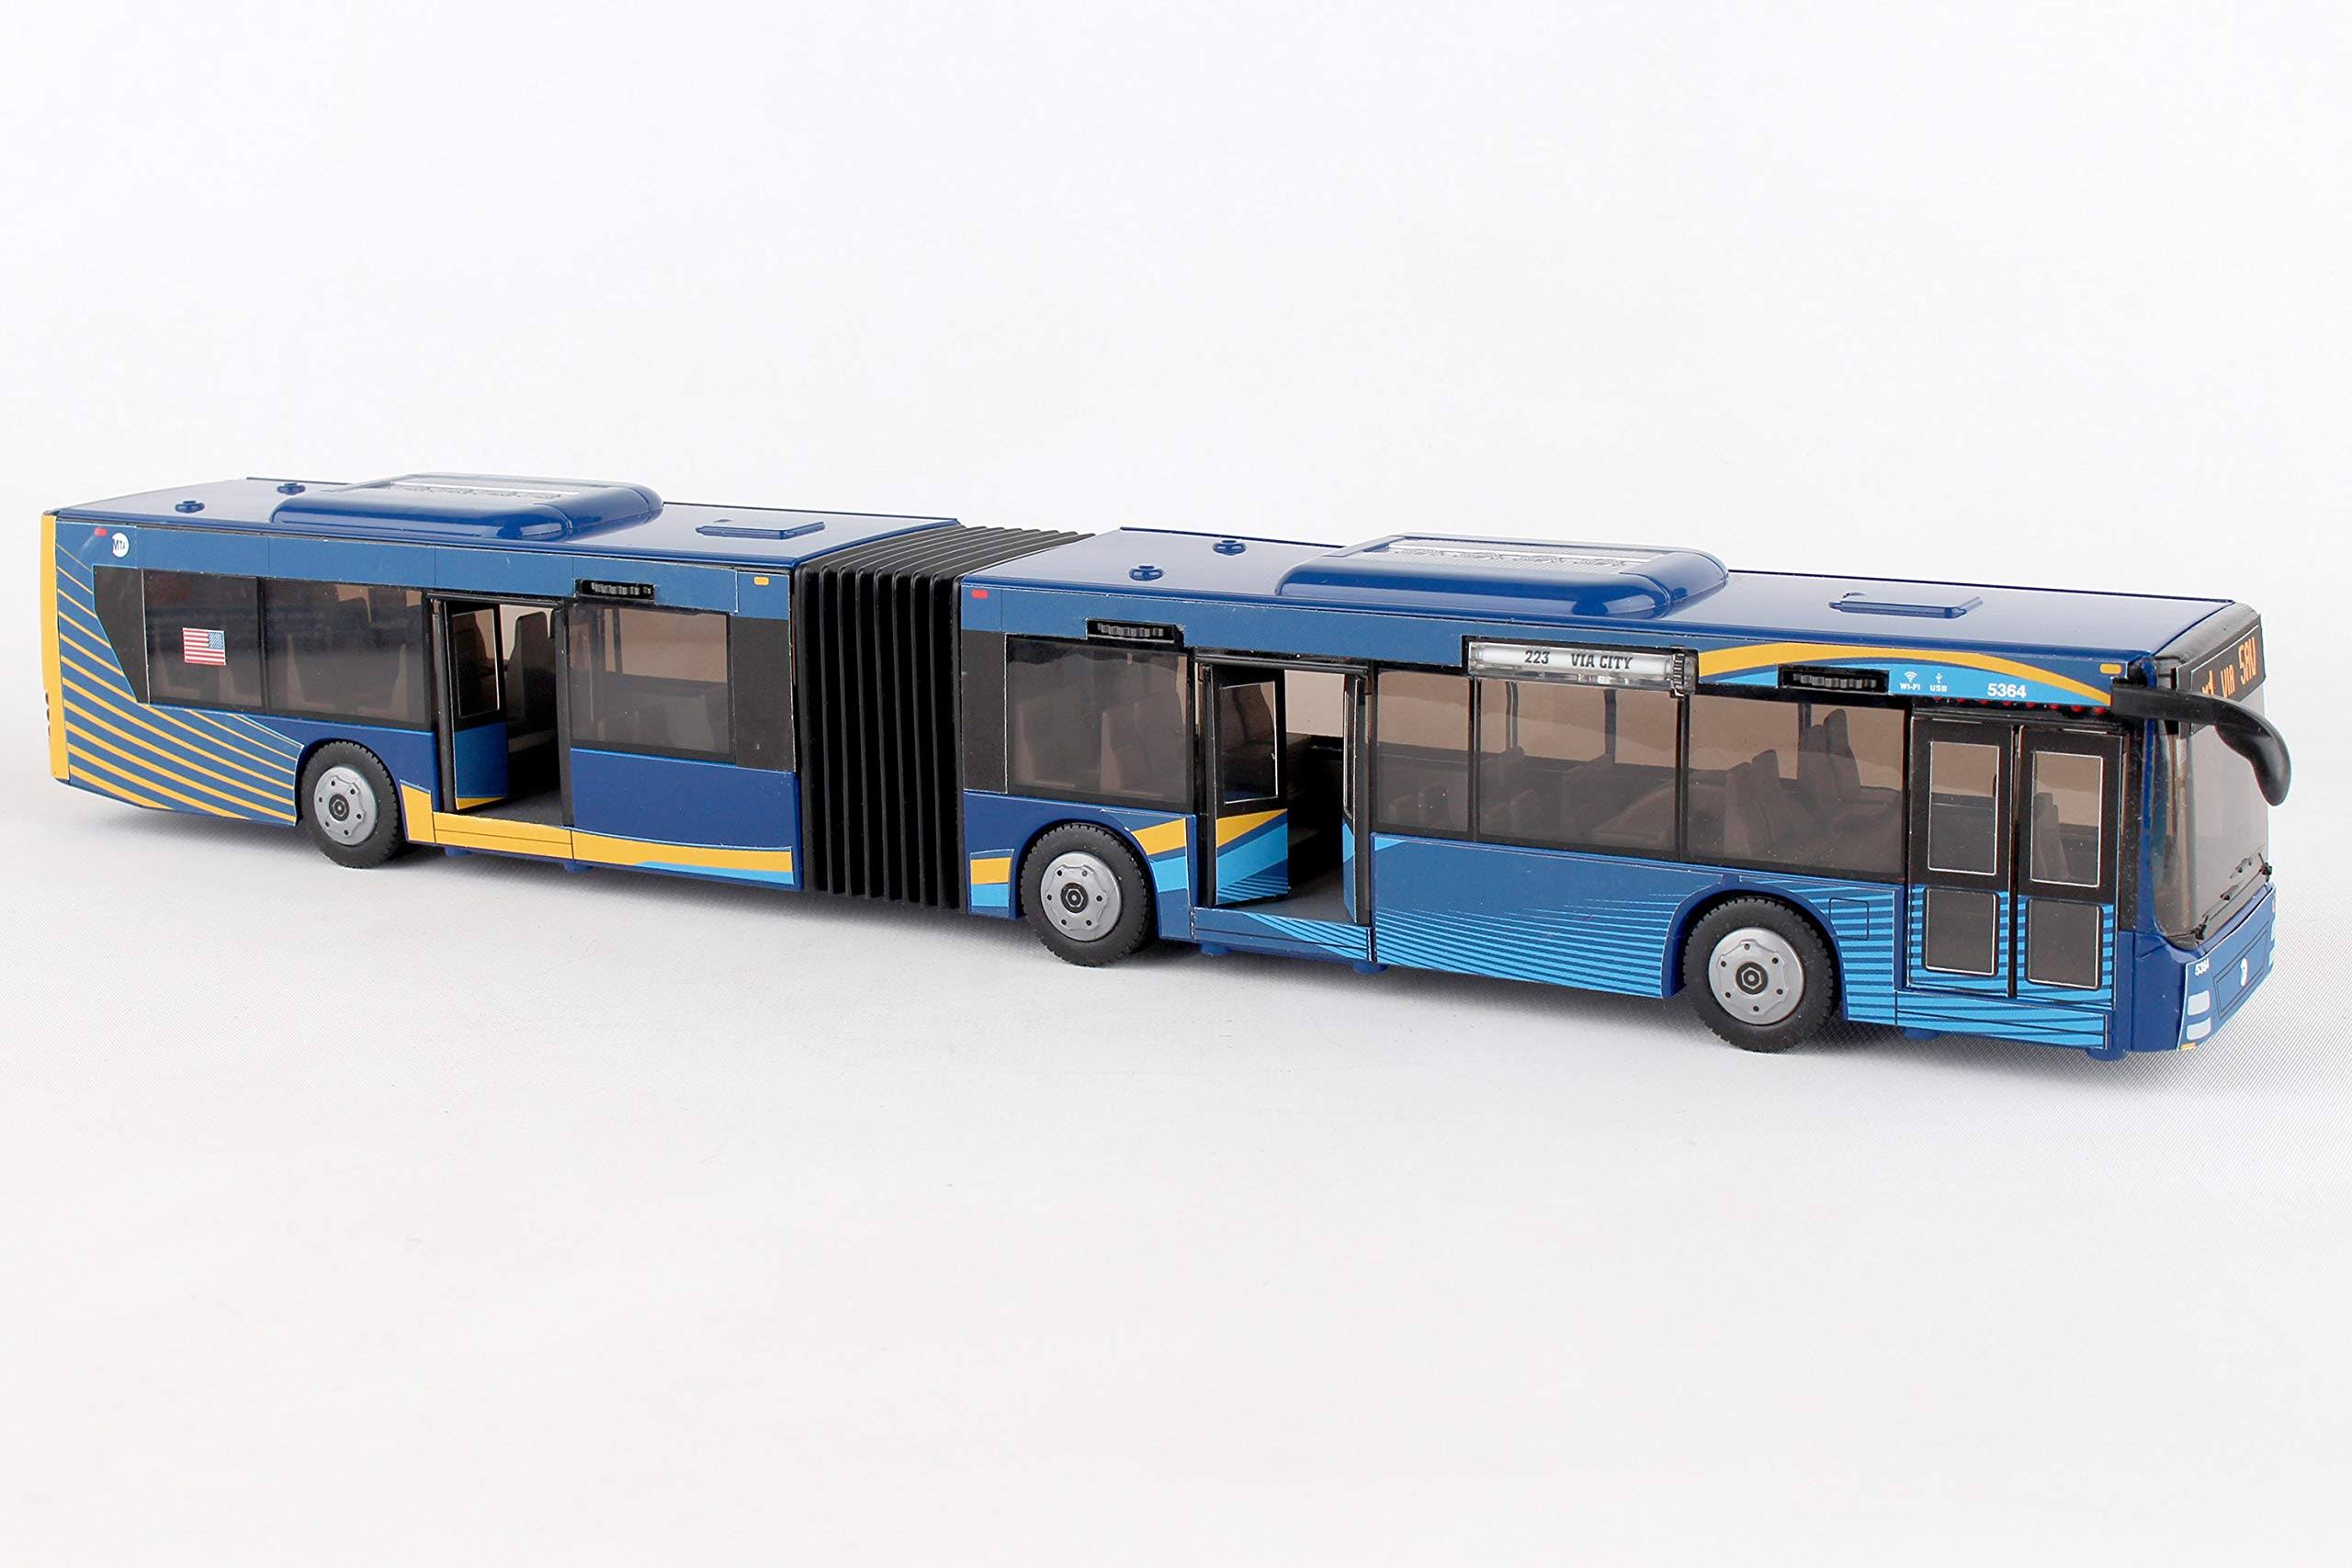 Daron MTA New York City Bus 16" Articulated Bus RT8571 Toy, Brown